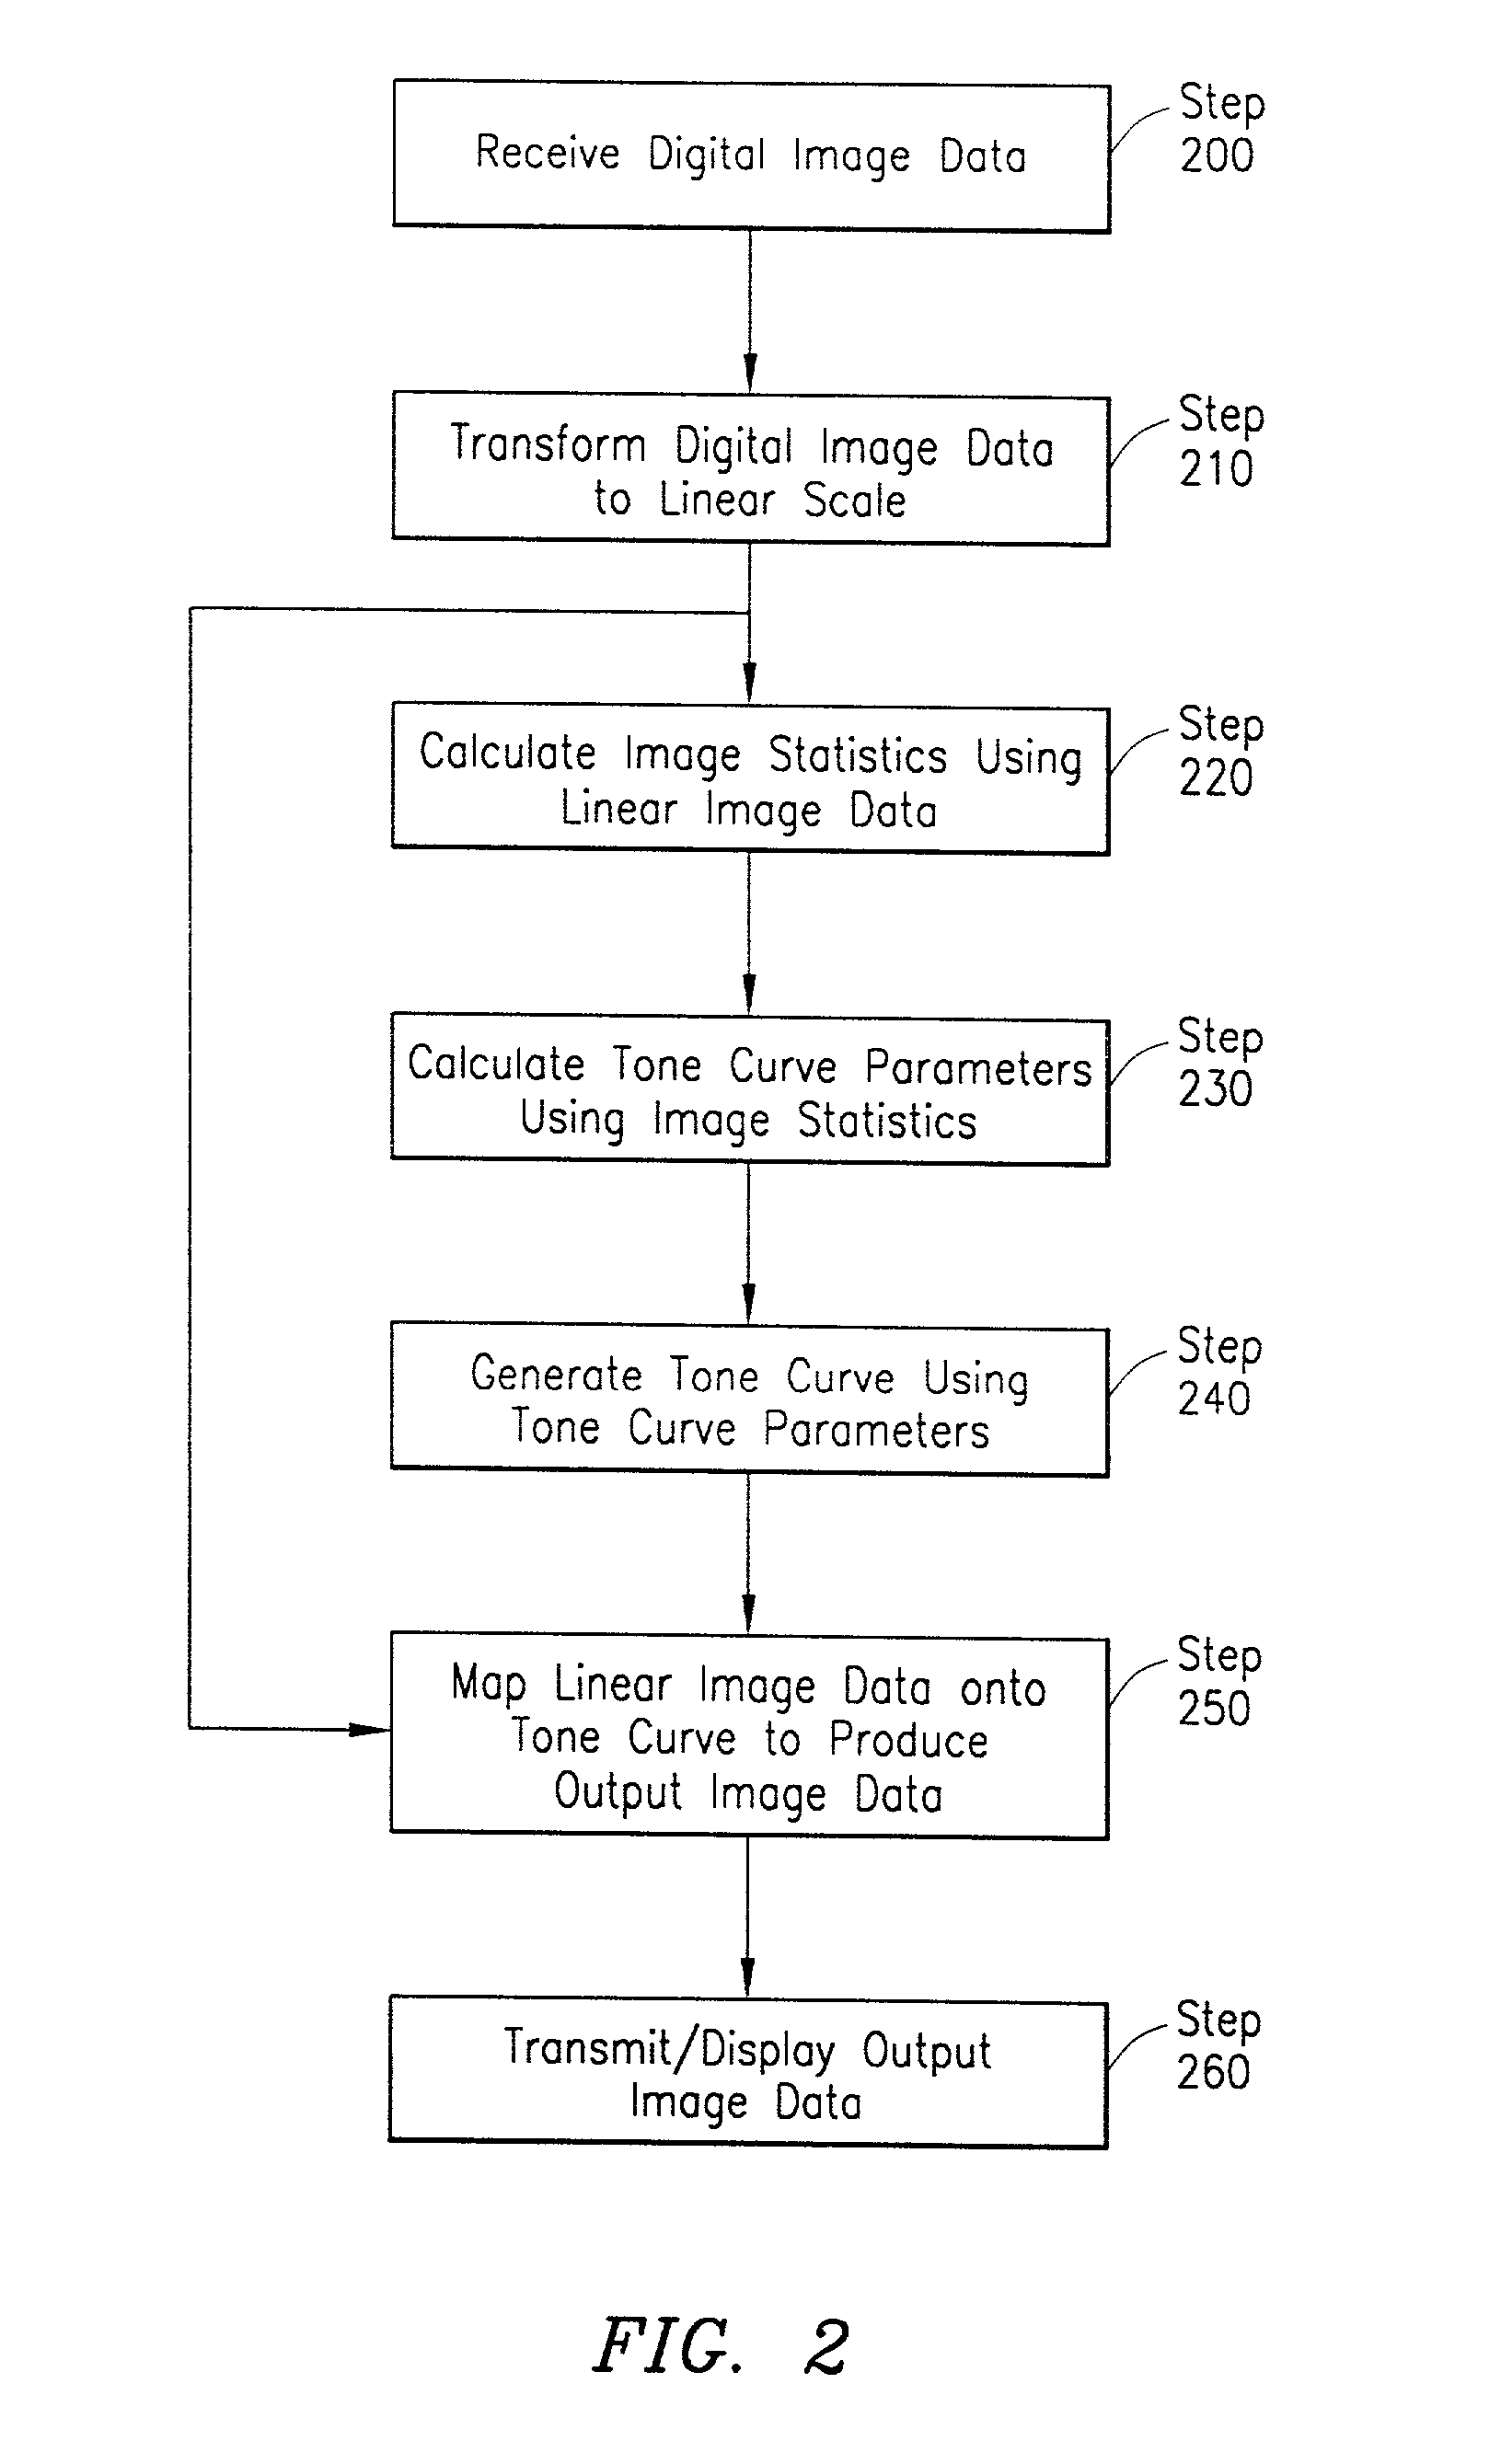 System and method for digital image tone mapping using an adaptive sigmoidal function based on perceptual preference guidelines